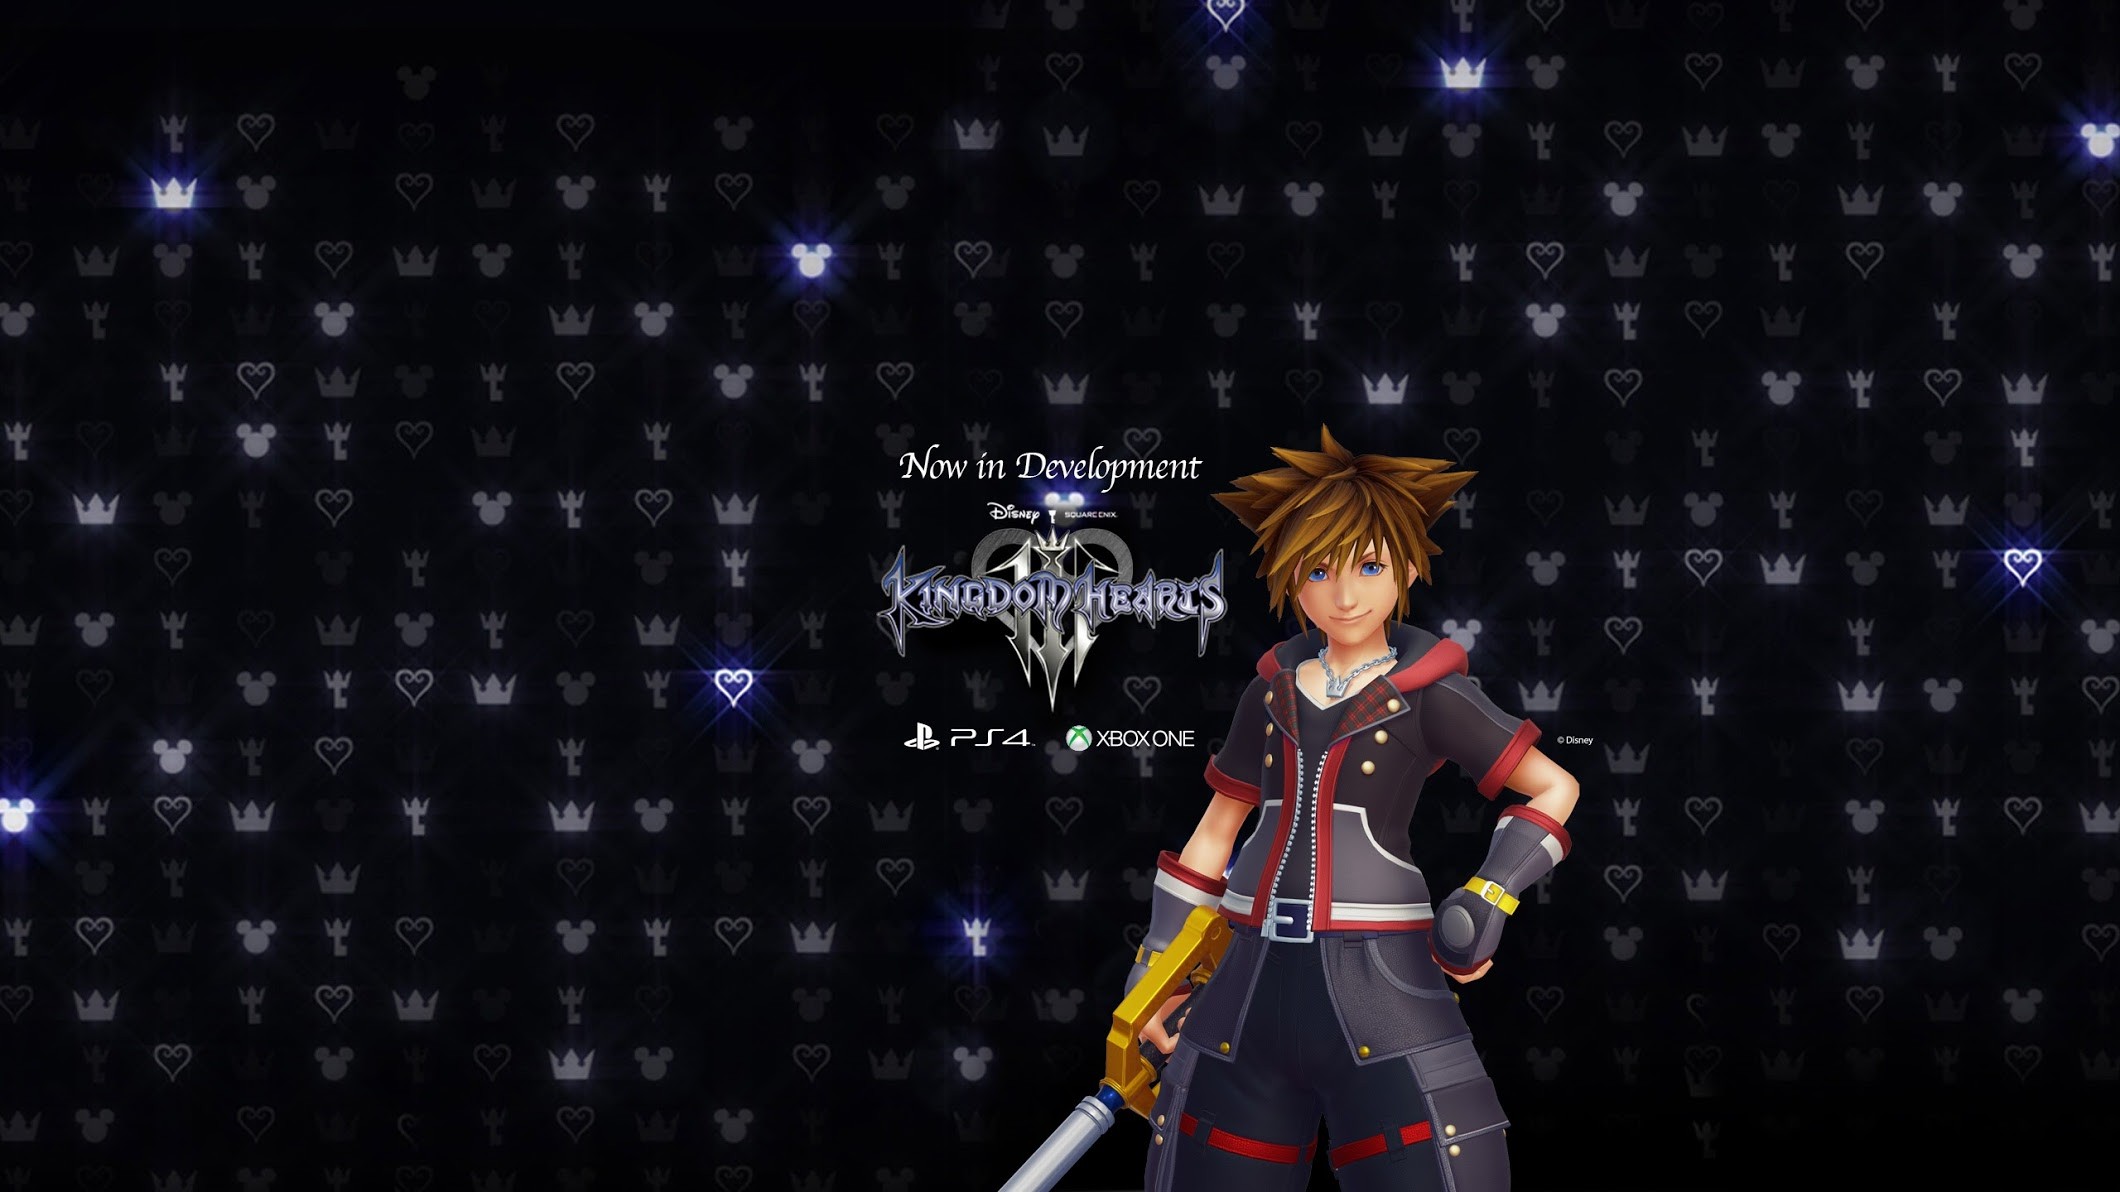 Kingdom Hearts 3 Wallpaper Download Free Cool Hd Backgrounds Images, Photos, Reviews